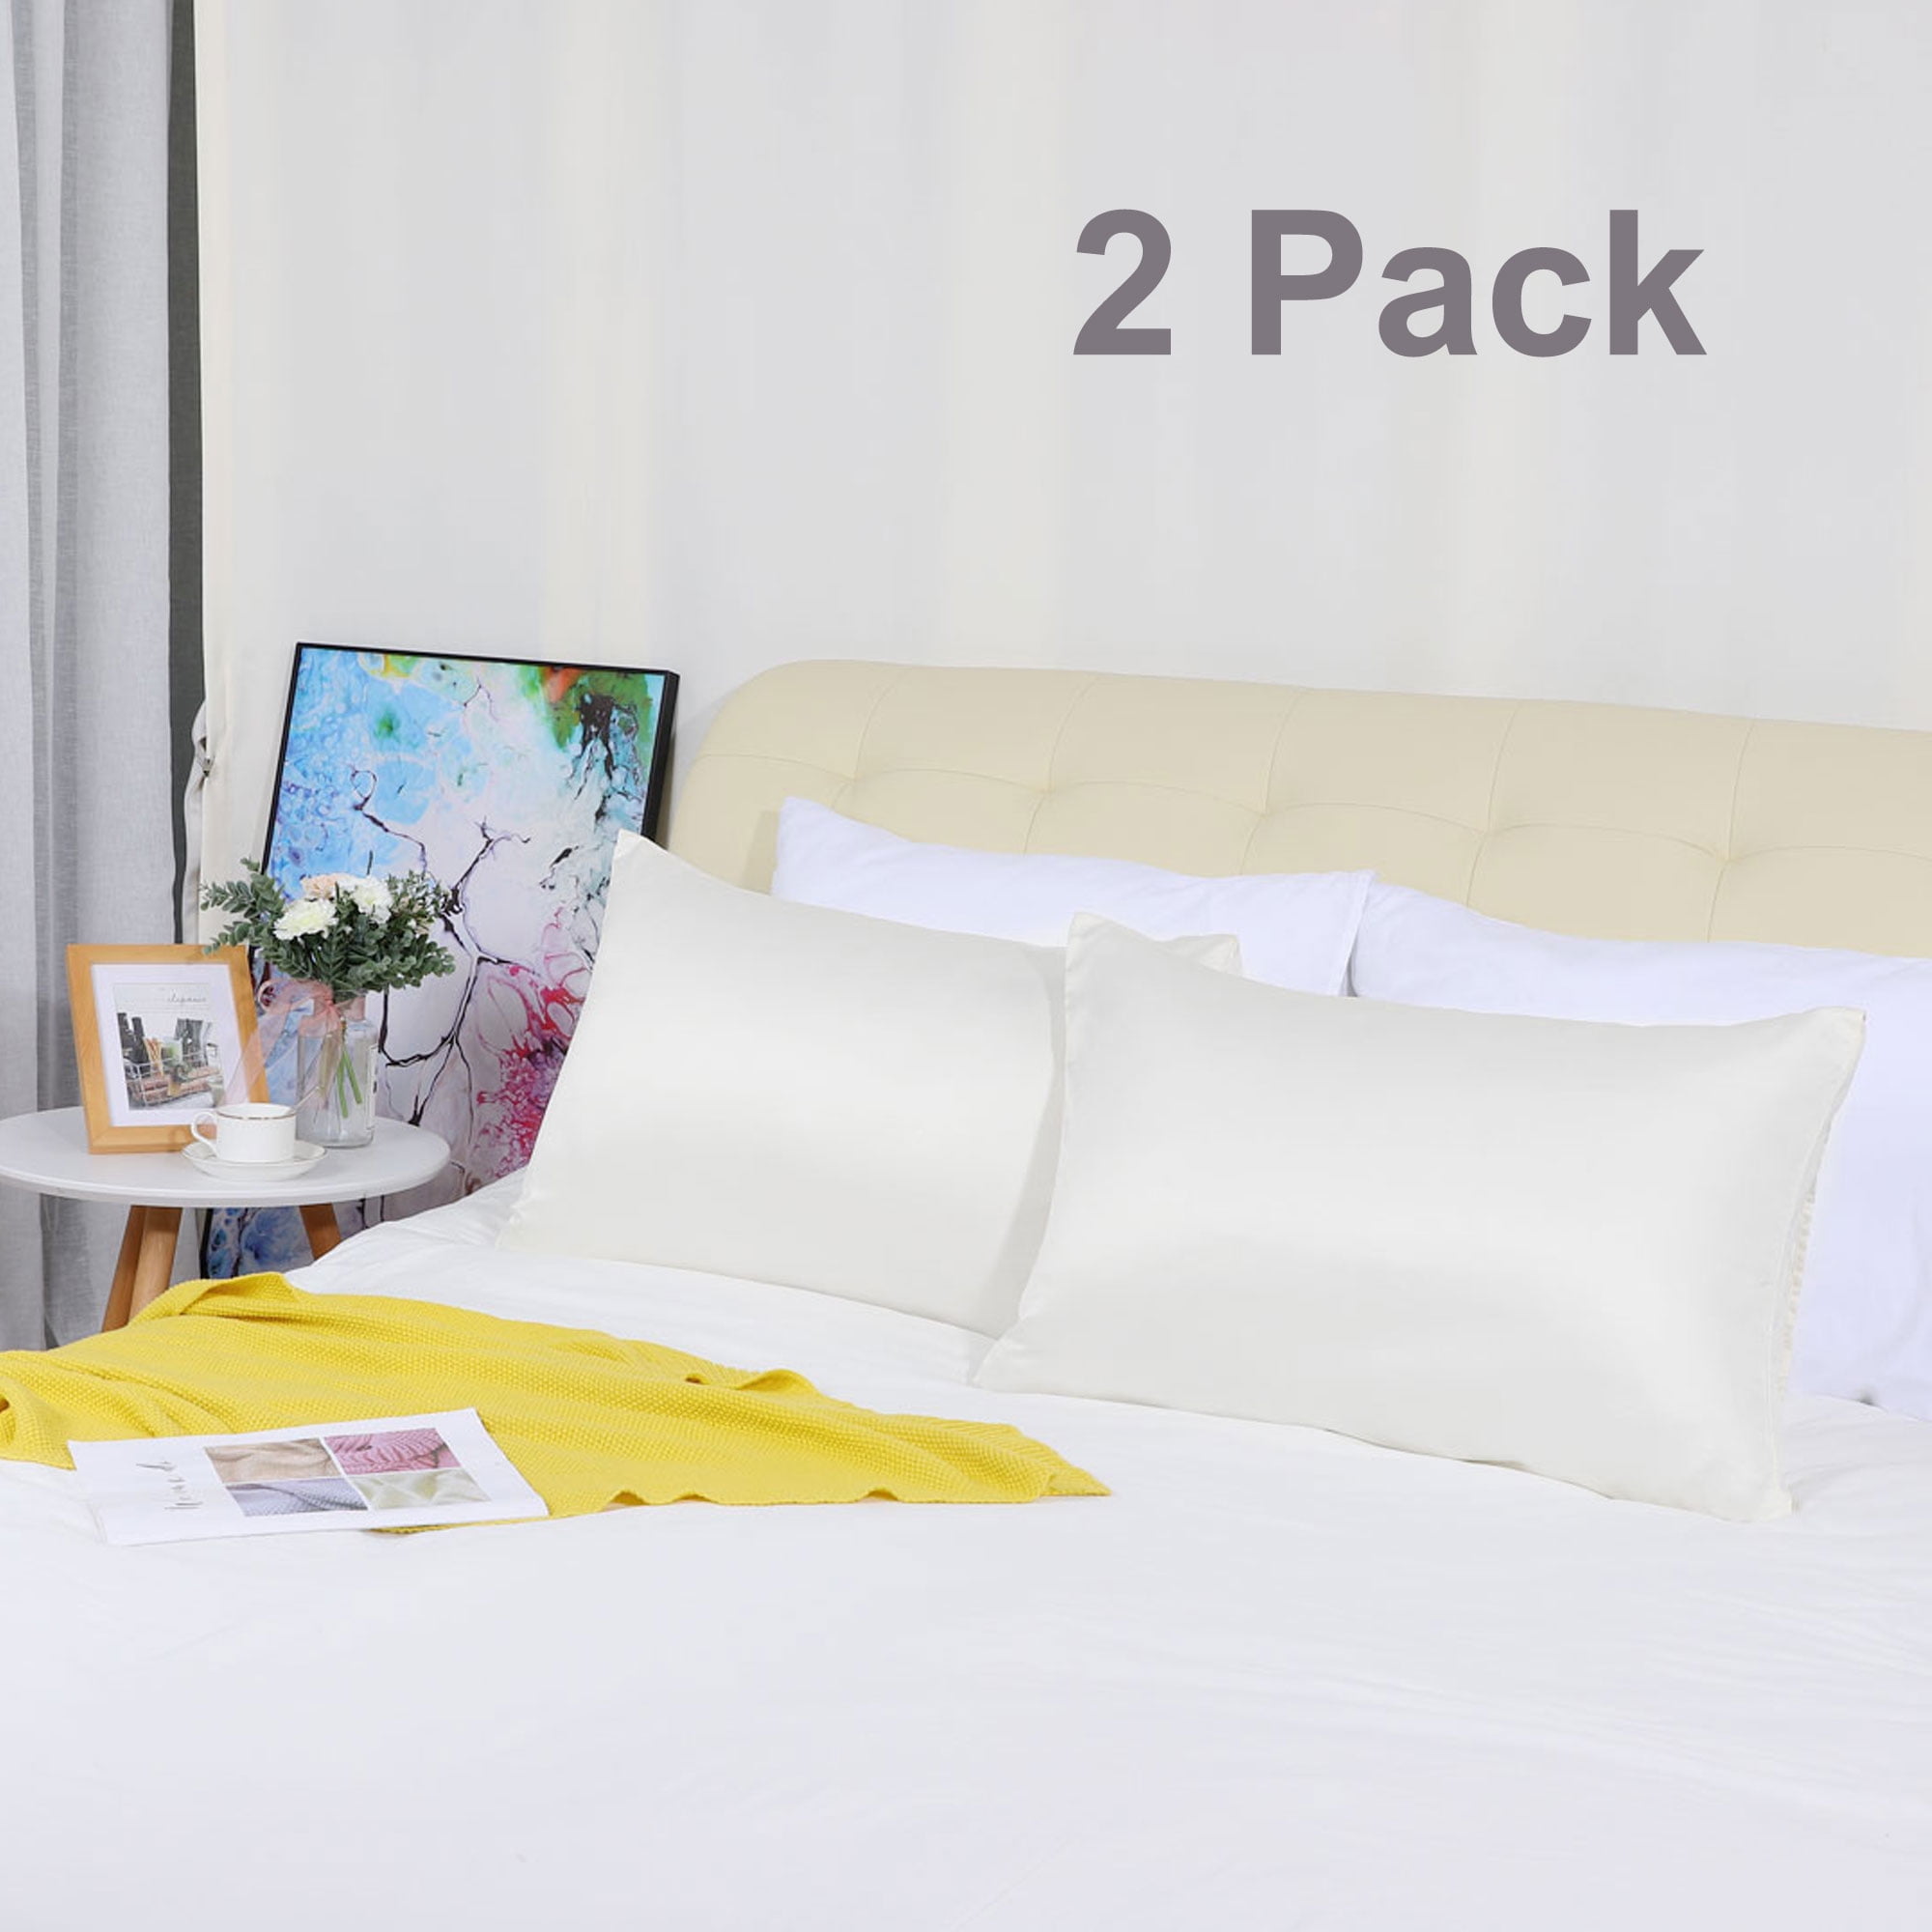 Details about   2 Pack Silk Pillowcase Soft Smooth Satin Luxury Bed Pillow Case Cushion Covers 